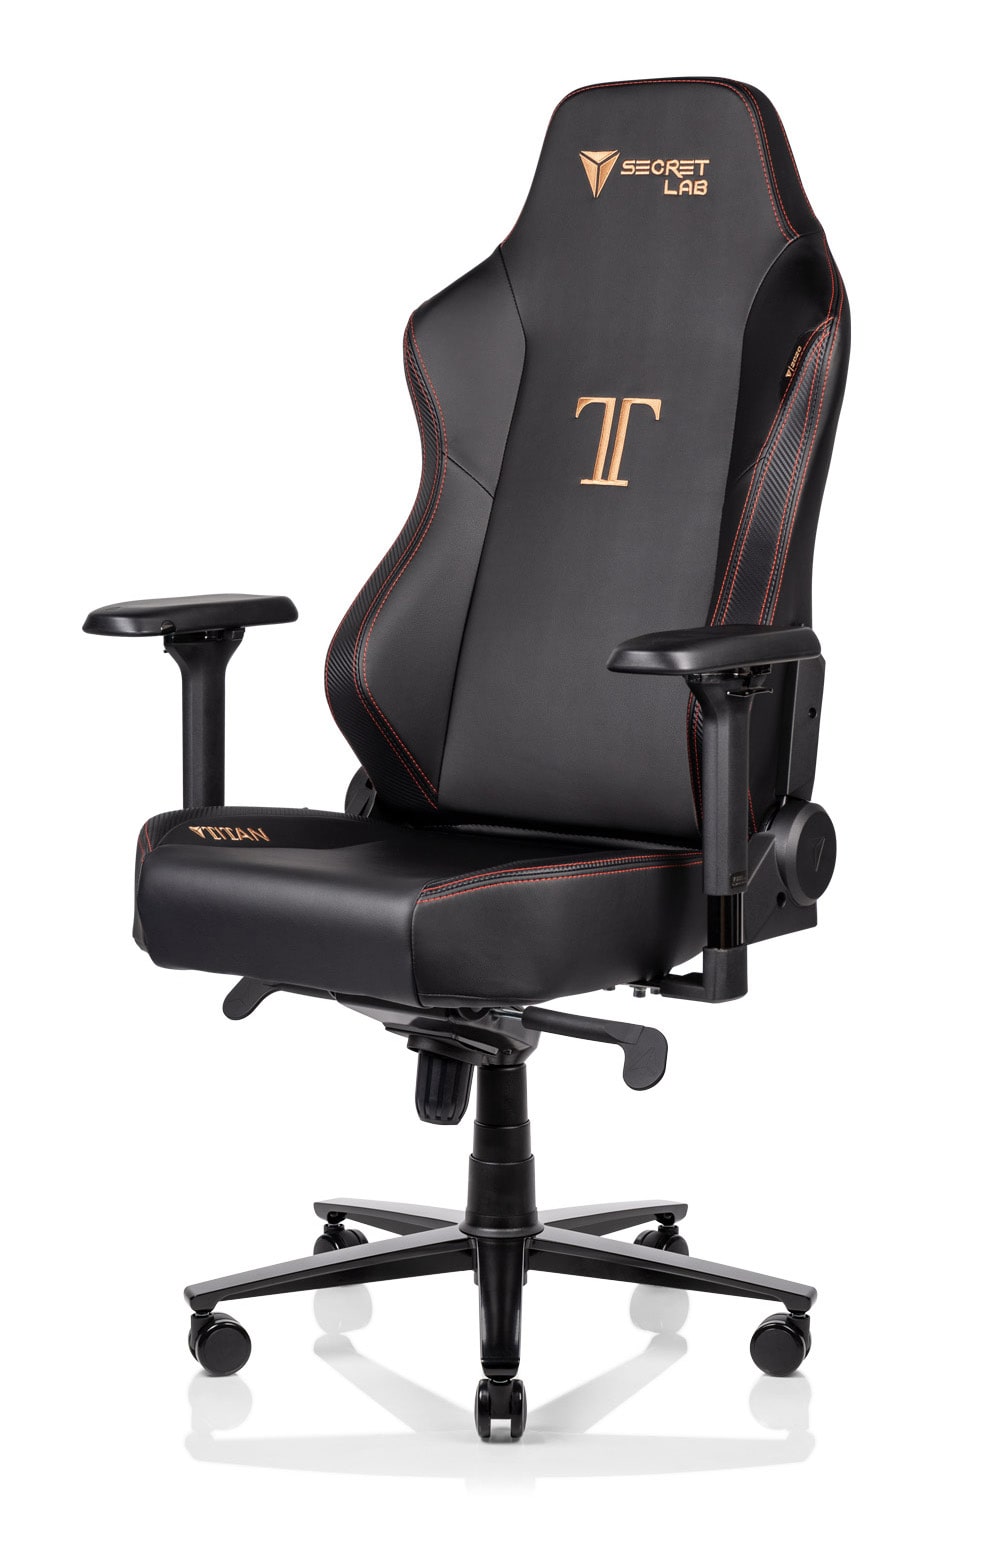 where to buy secret lab chair